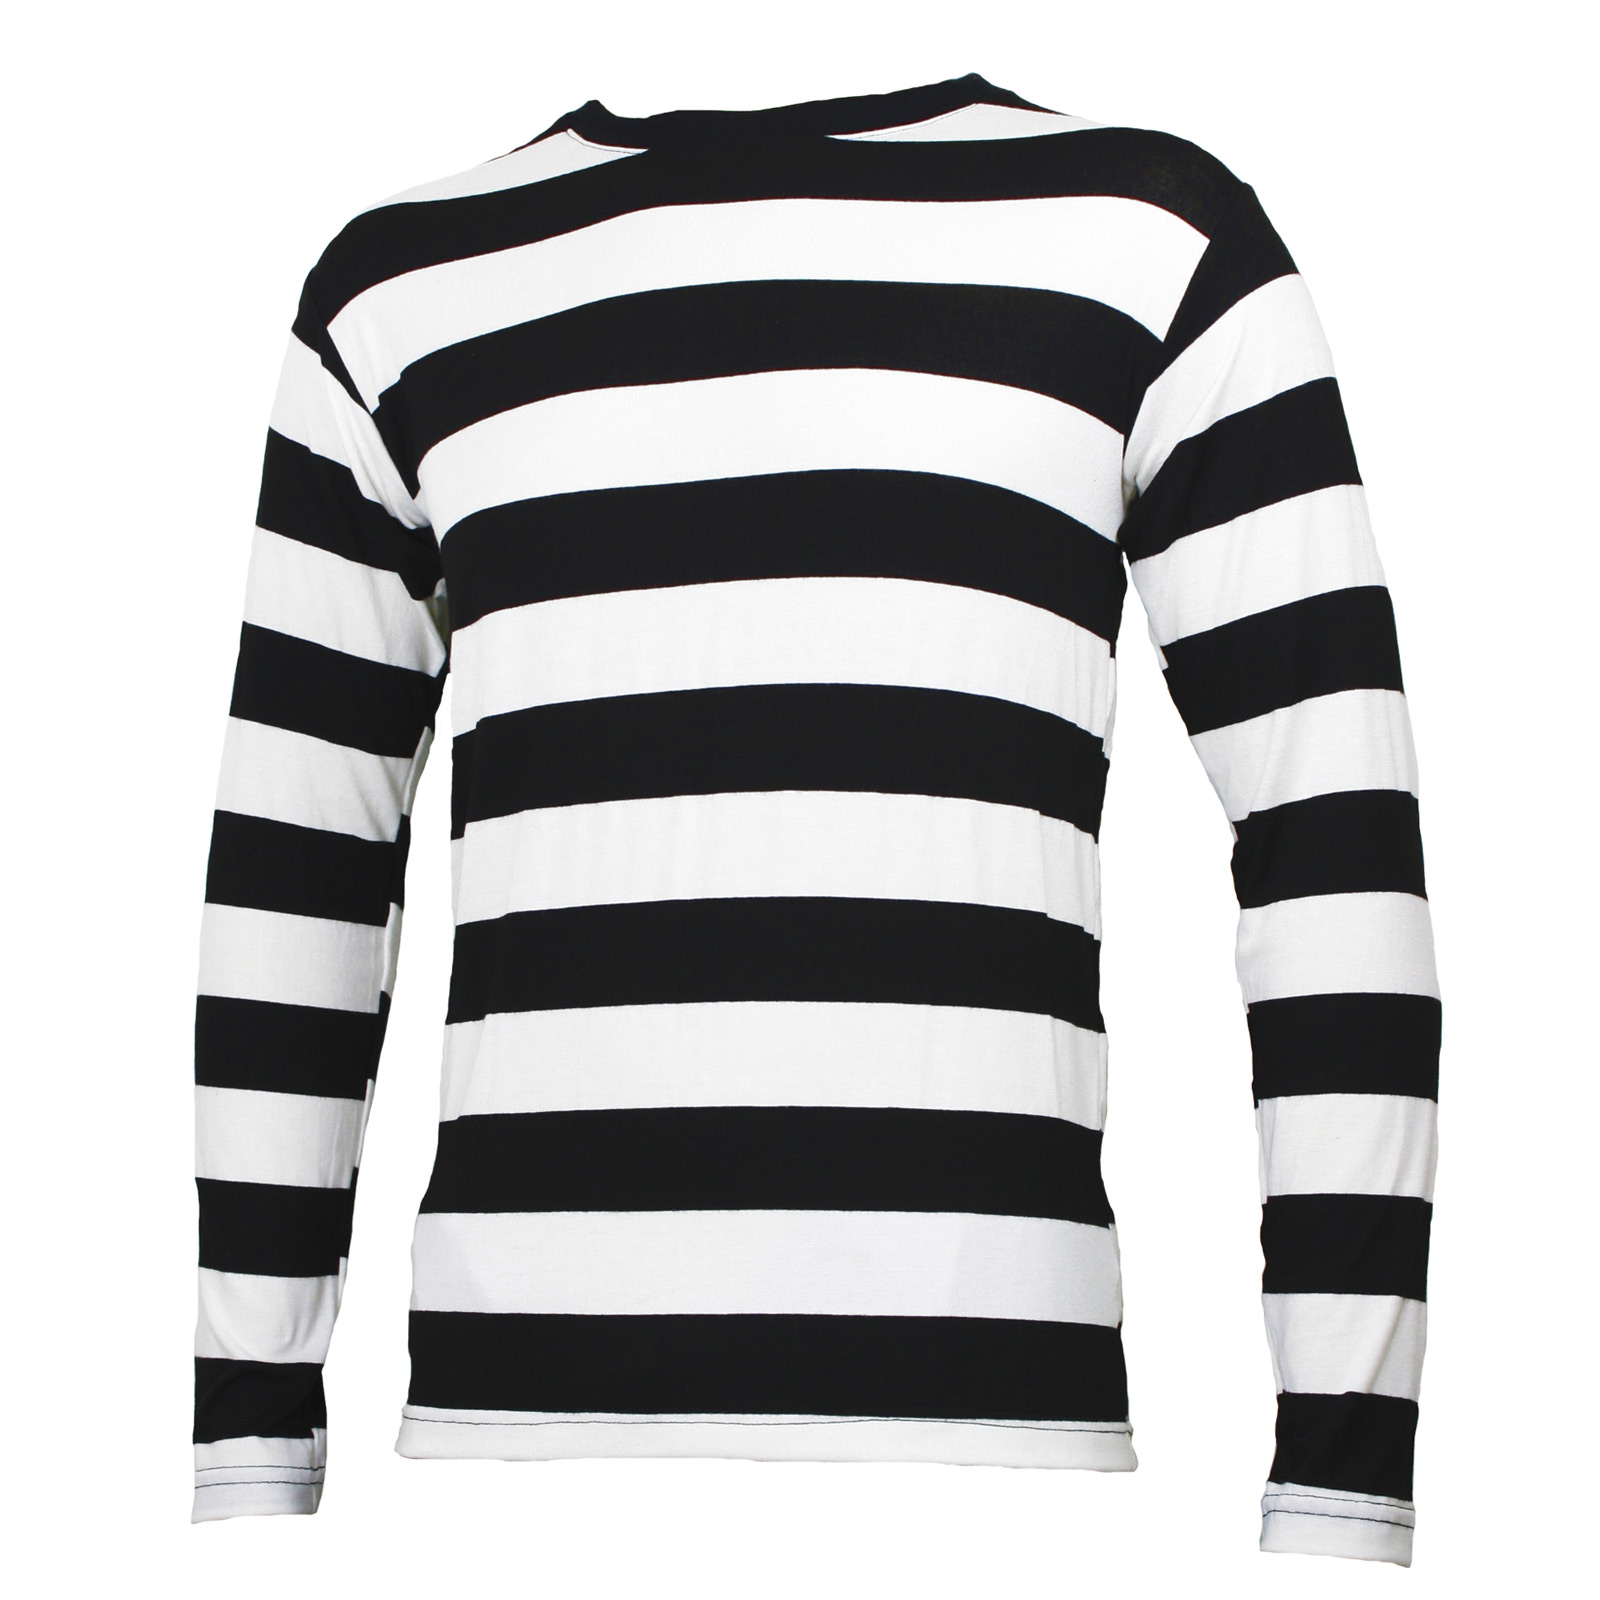 Mens Black And White Striped T Shirt Long Sleeve - Womens Round Neck ...